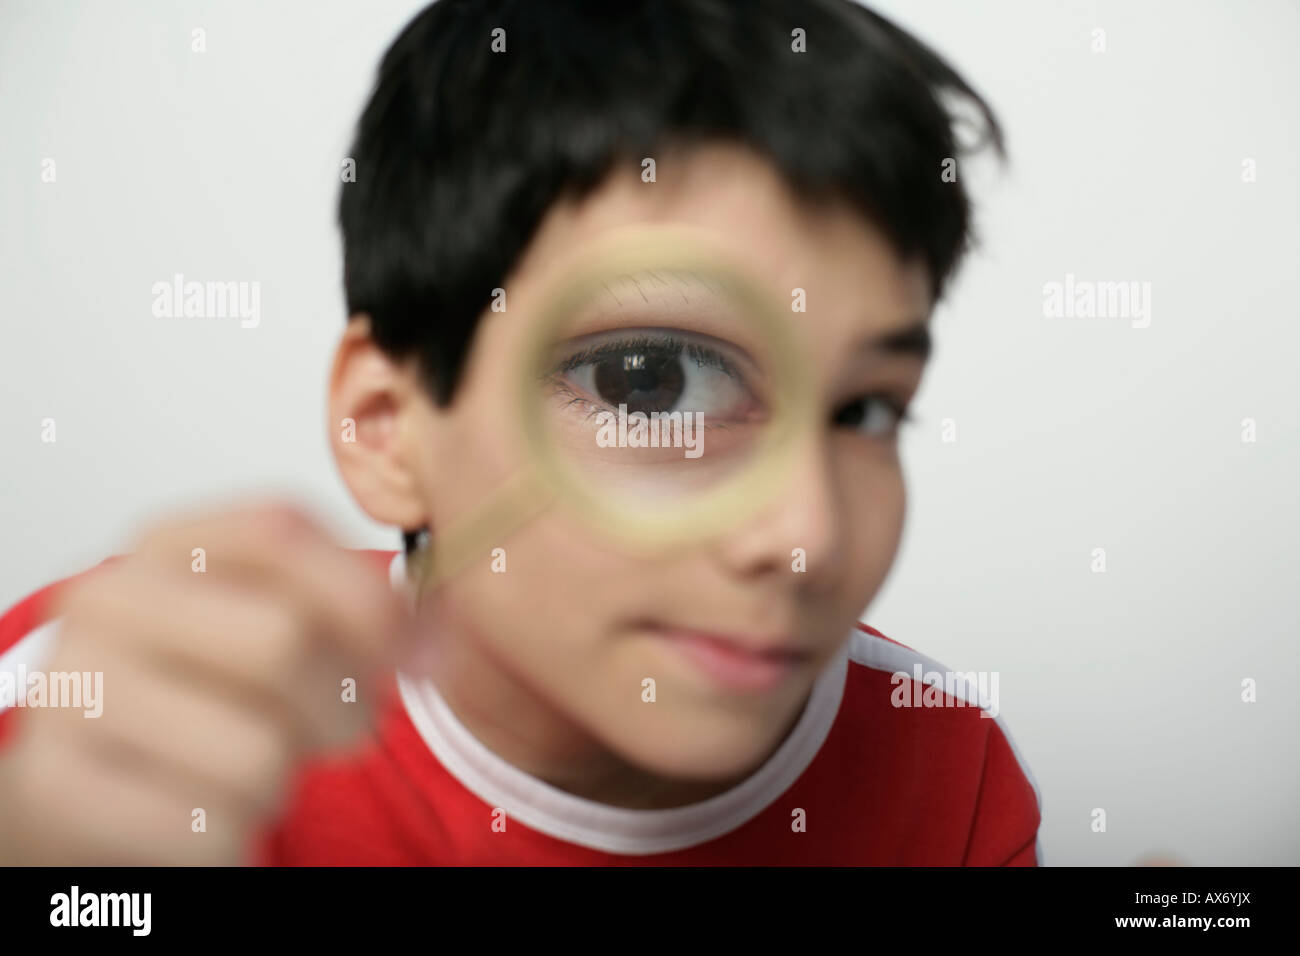 Boy looking through a magnifying glass at camera, fully released Stock Photo